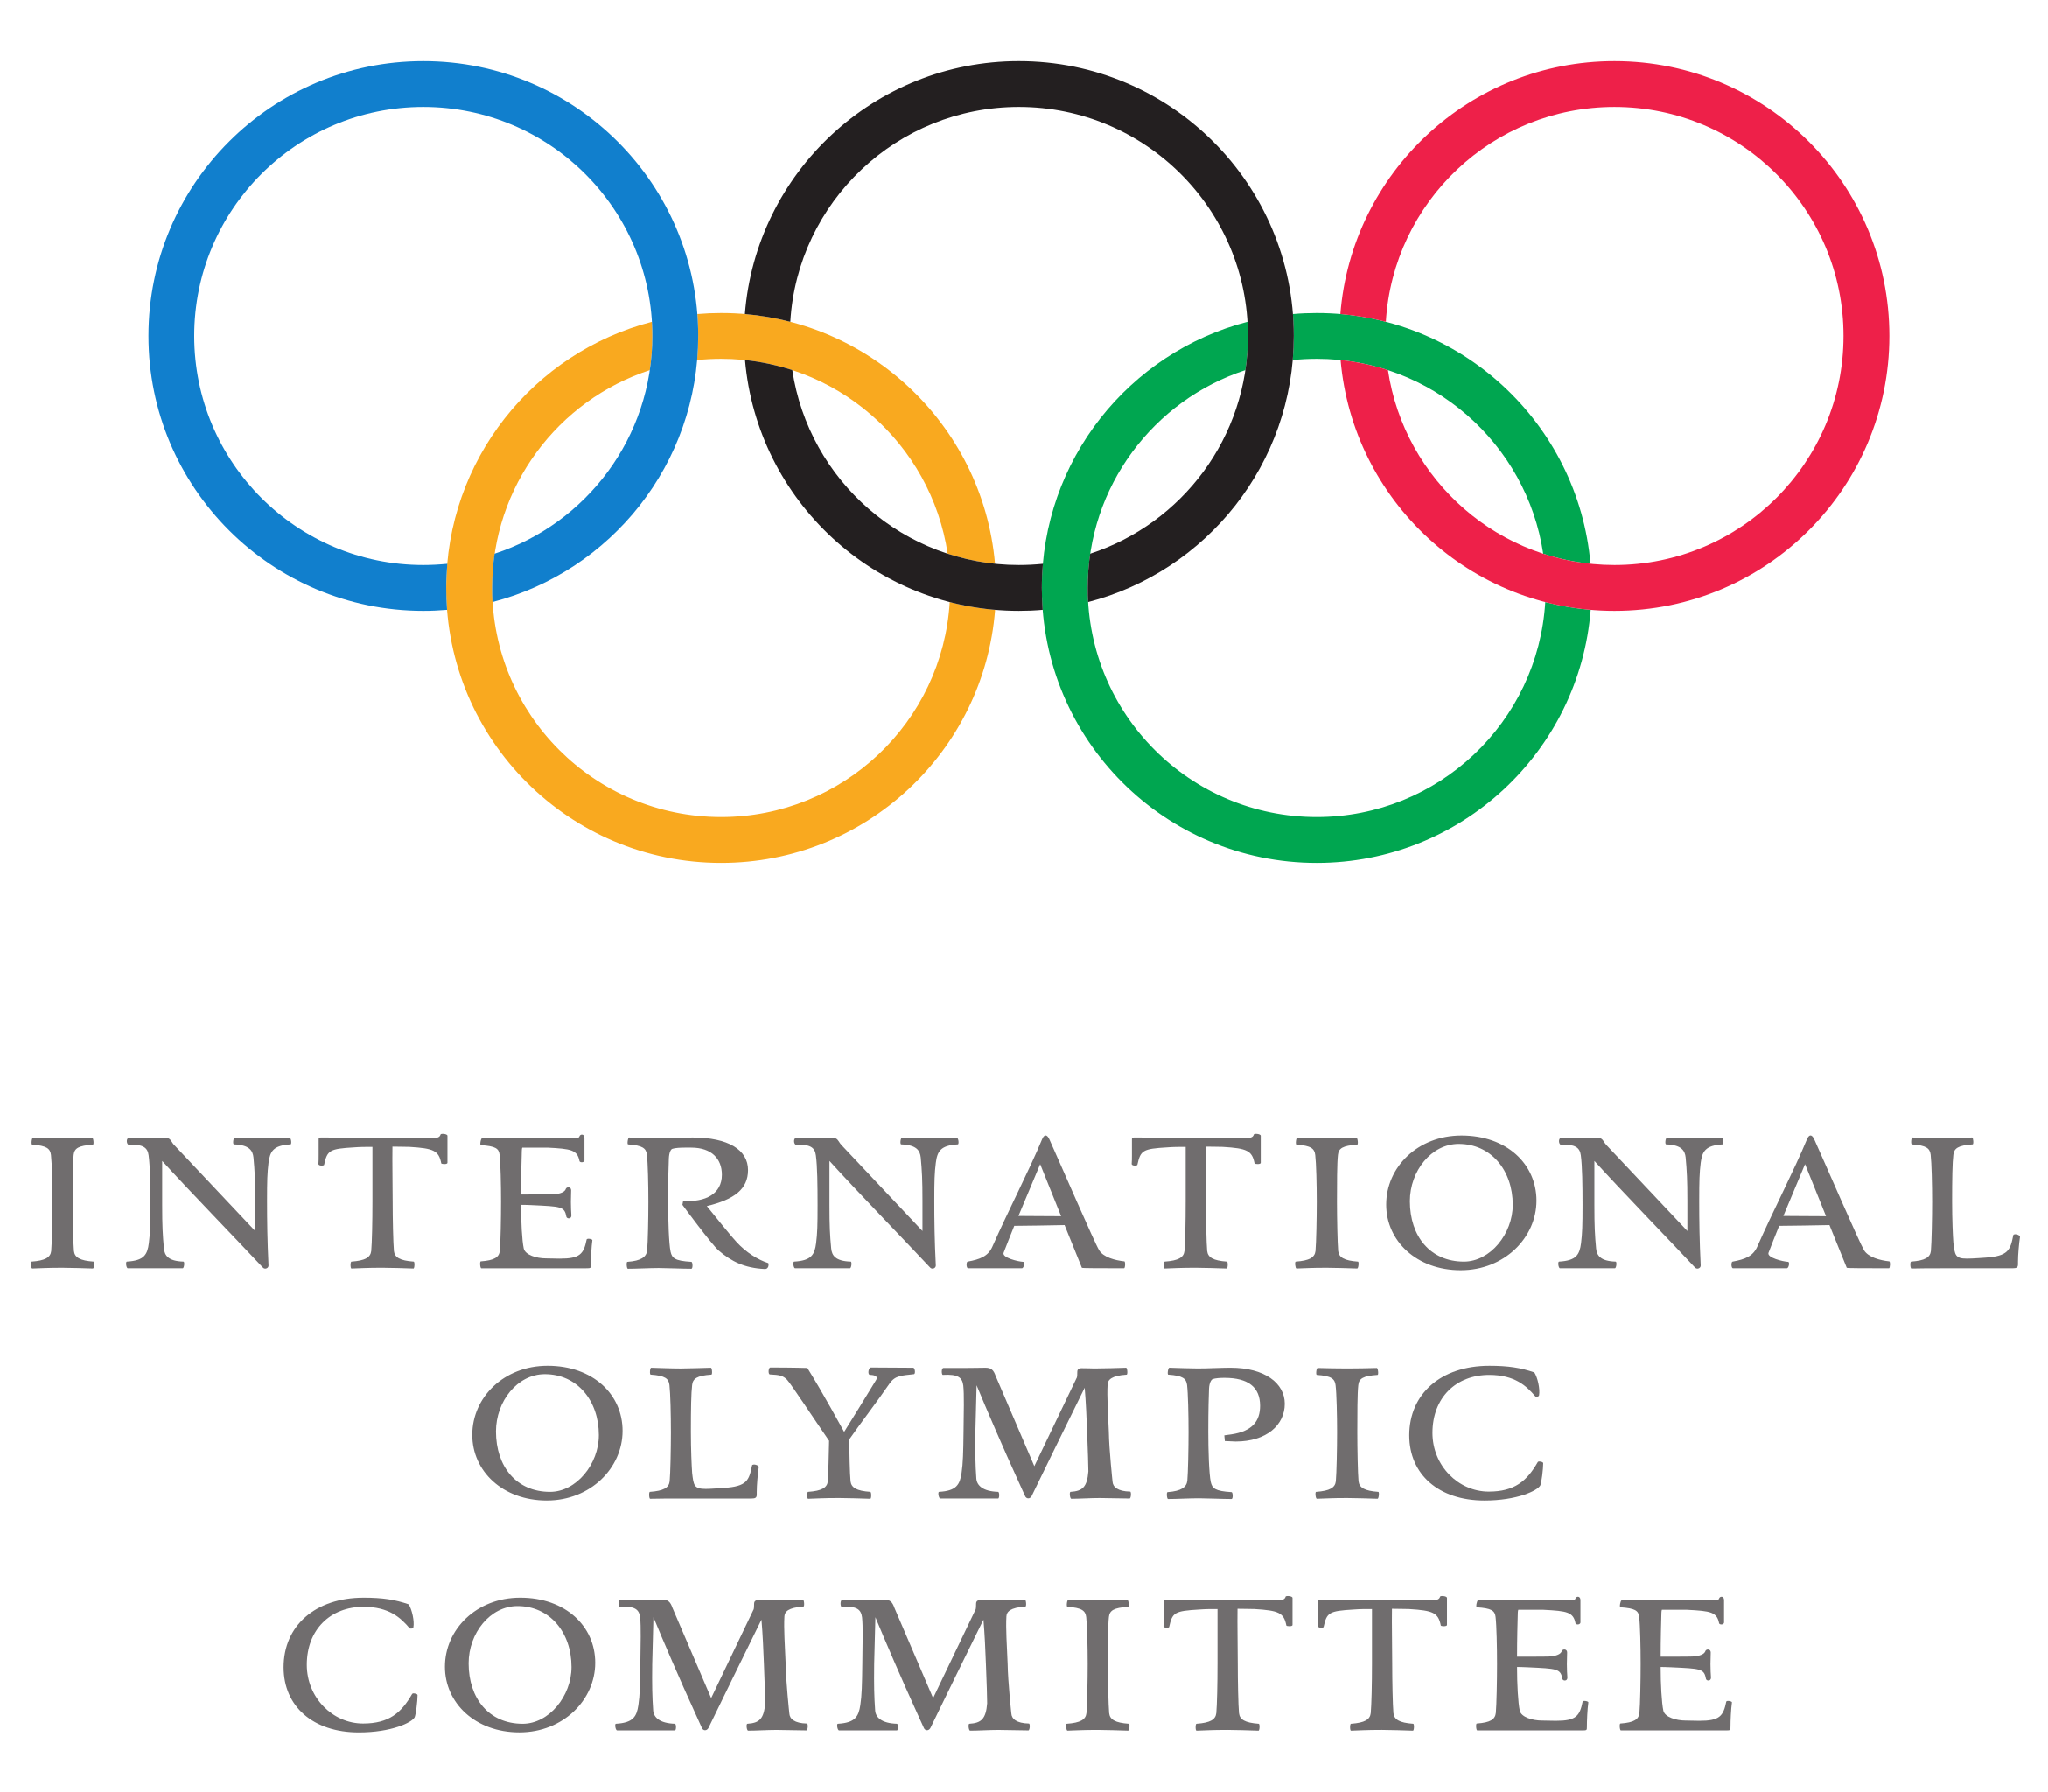 Olympics-Russian IOC members skipped Olympic session-source 